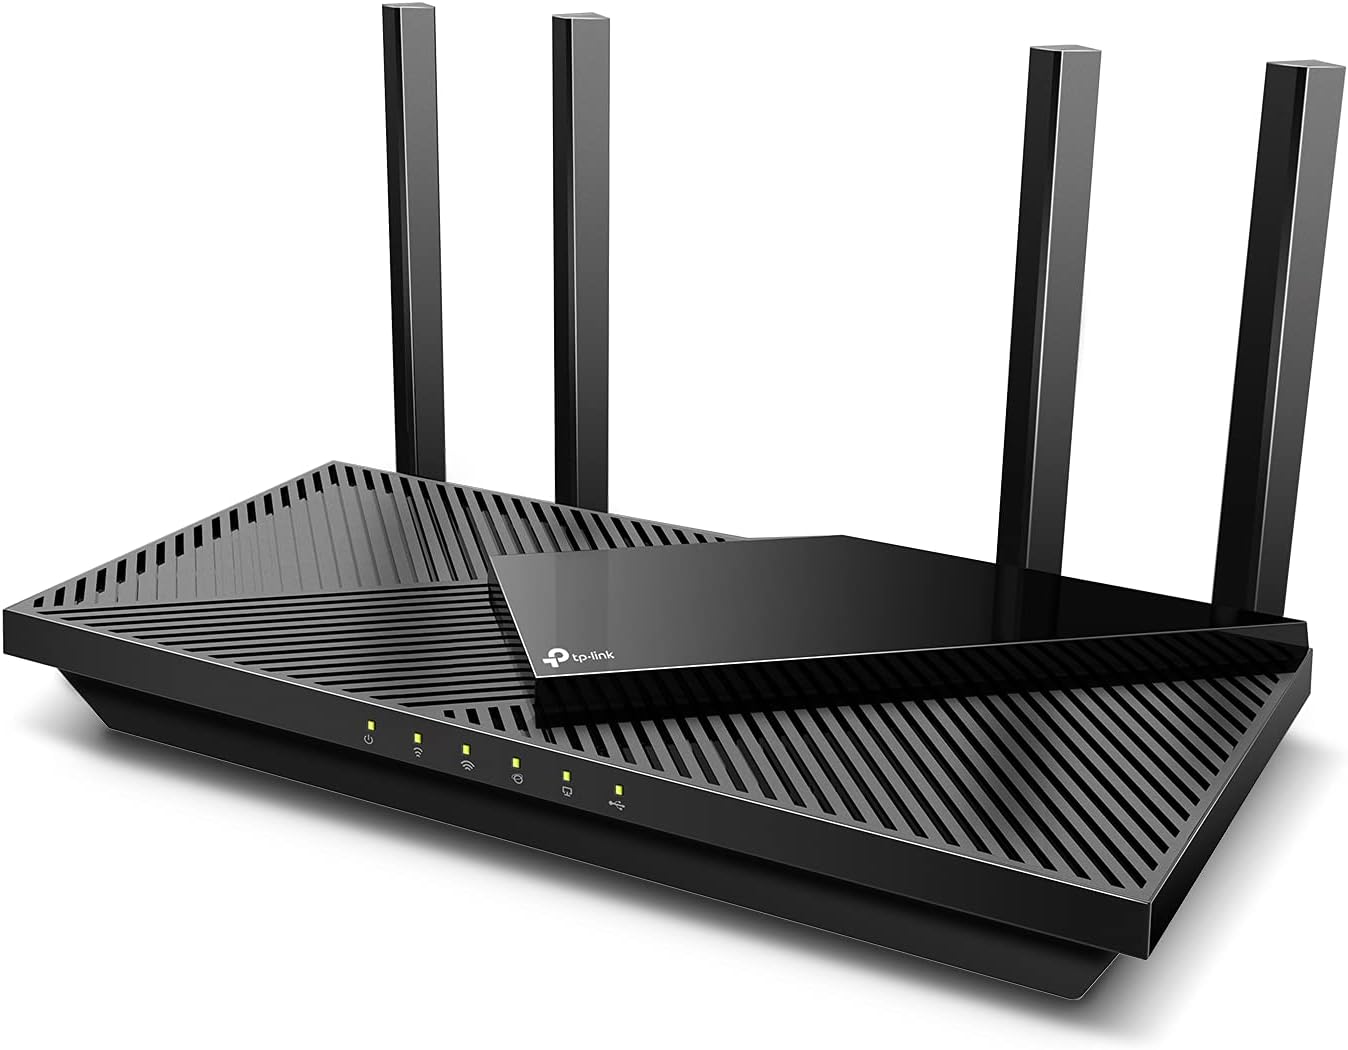 TP-Link AX3000 WiFi 6 Router TP-Link AX3000 WiFi 6 Router – 802.11ax Wireless Router, Gigabit, Dual Band Internet Router, VPN Router, OneMesh Compatible (Archer AX55)